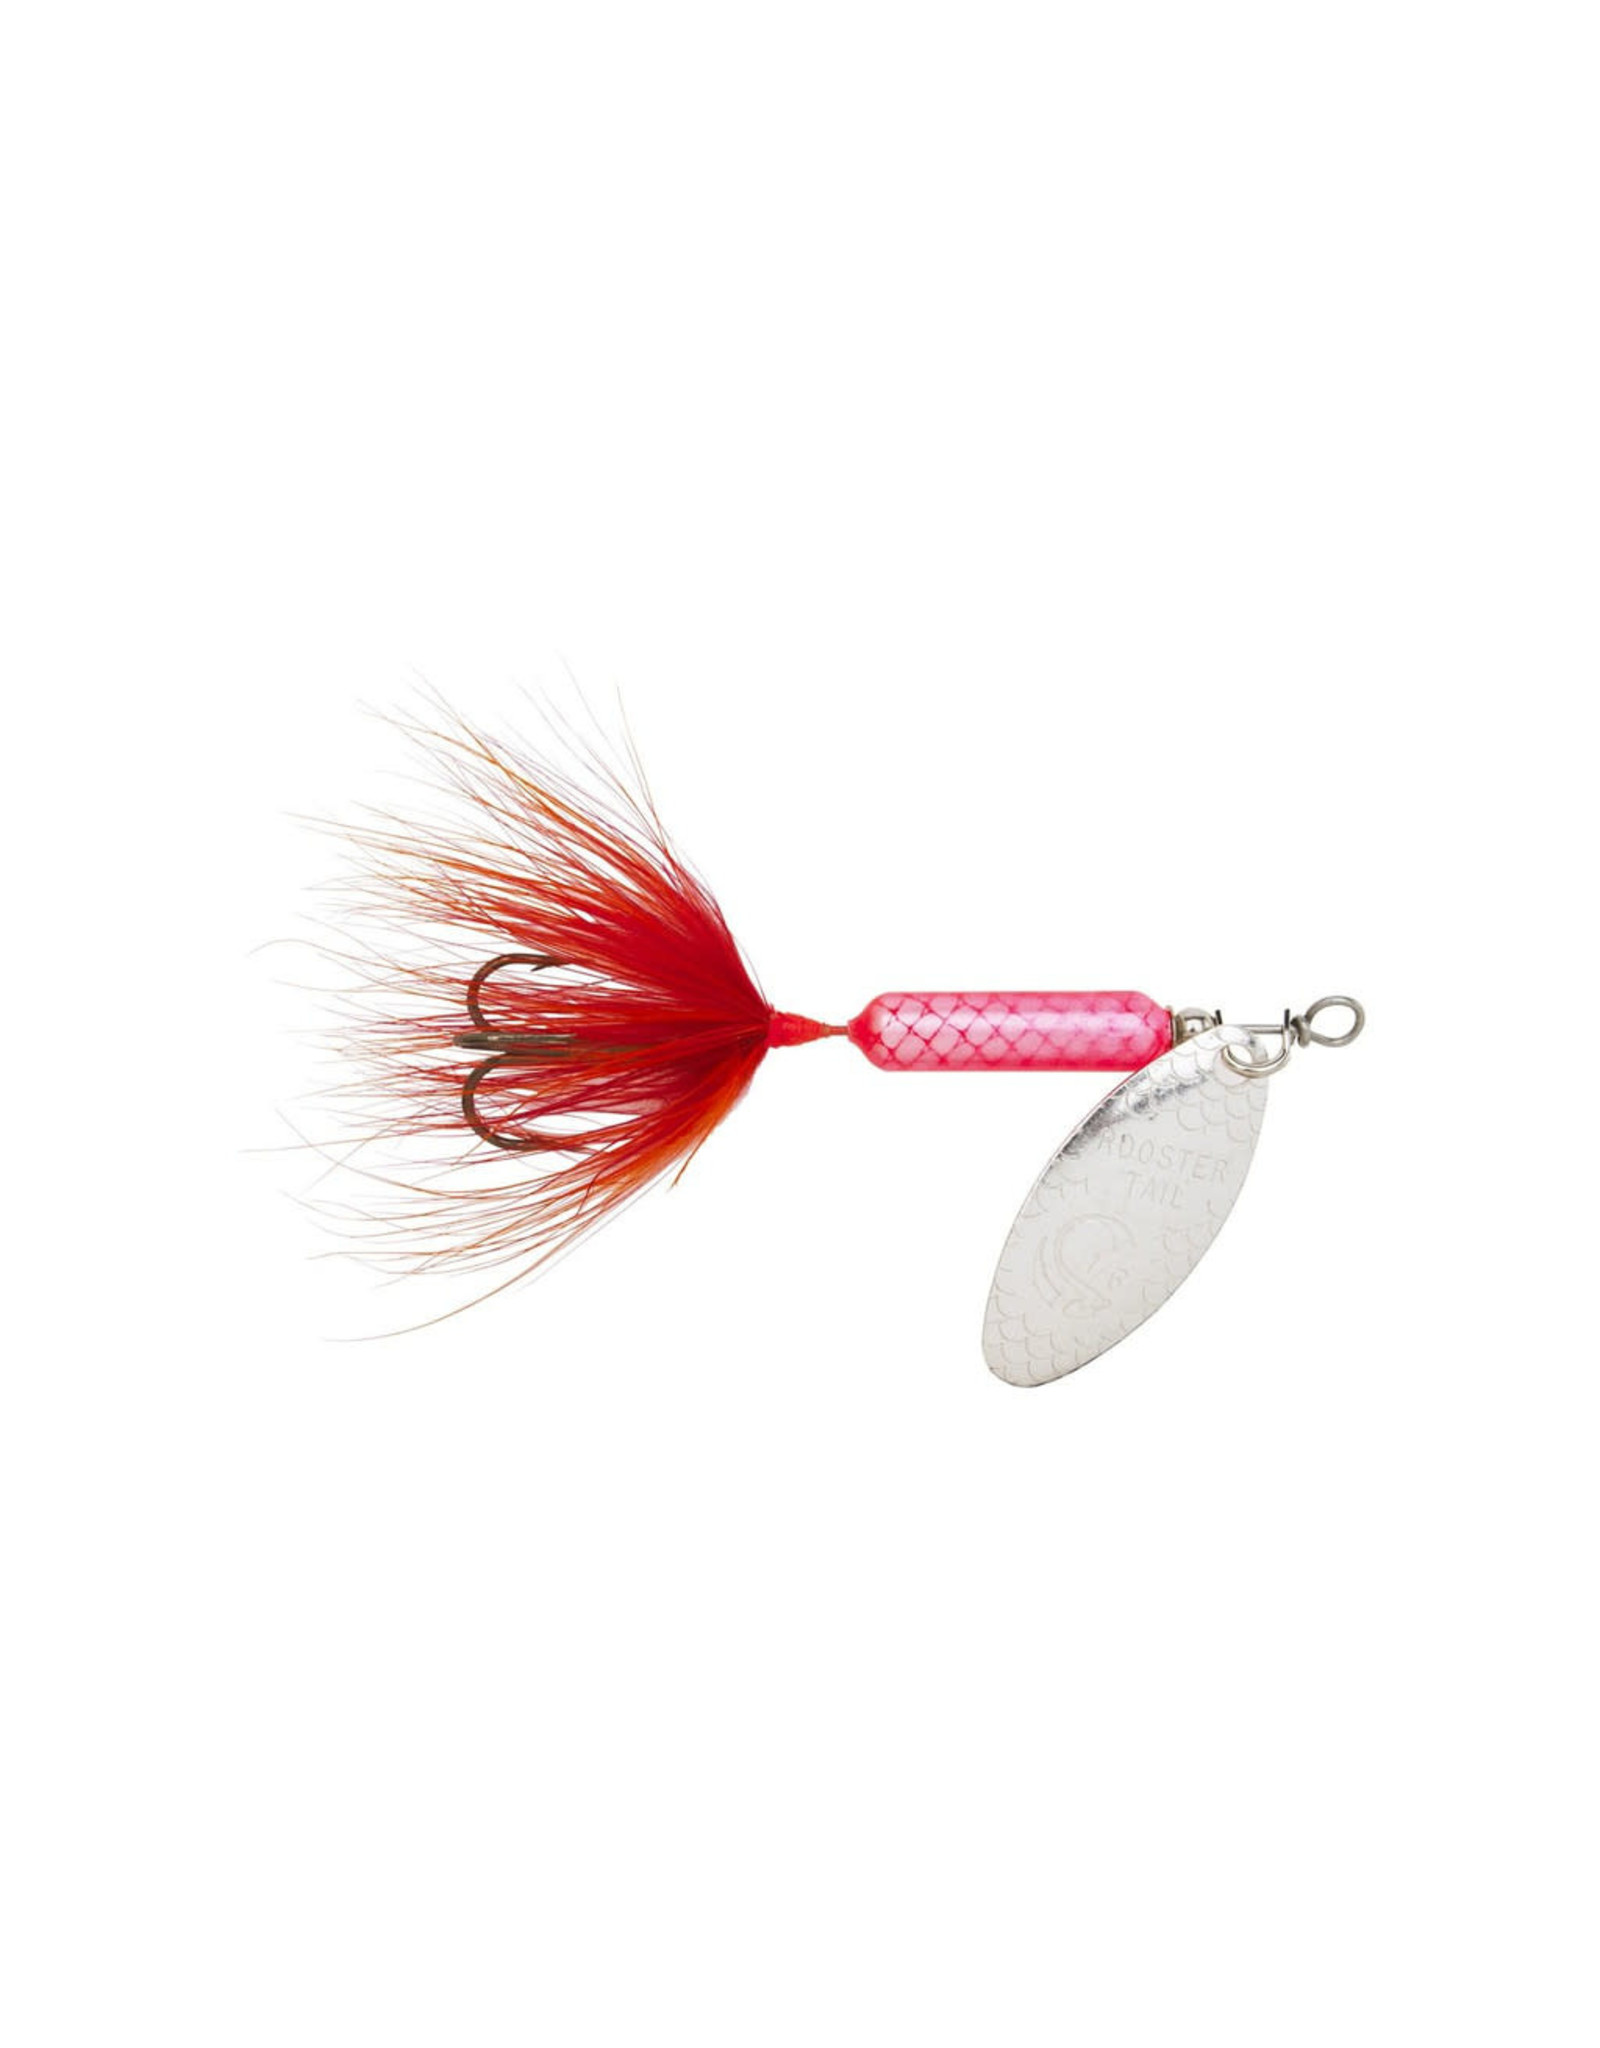 Worden's Rooster Tail 1/8 Oz. - Flame